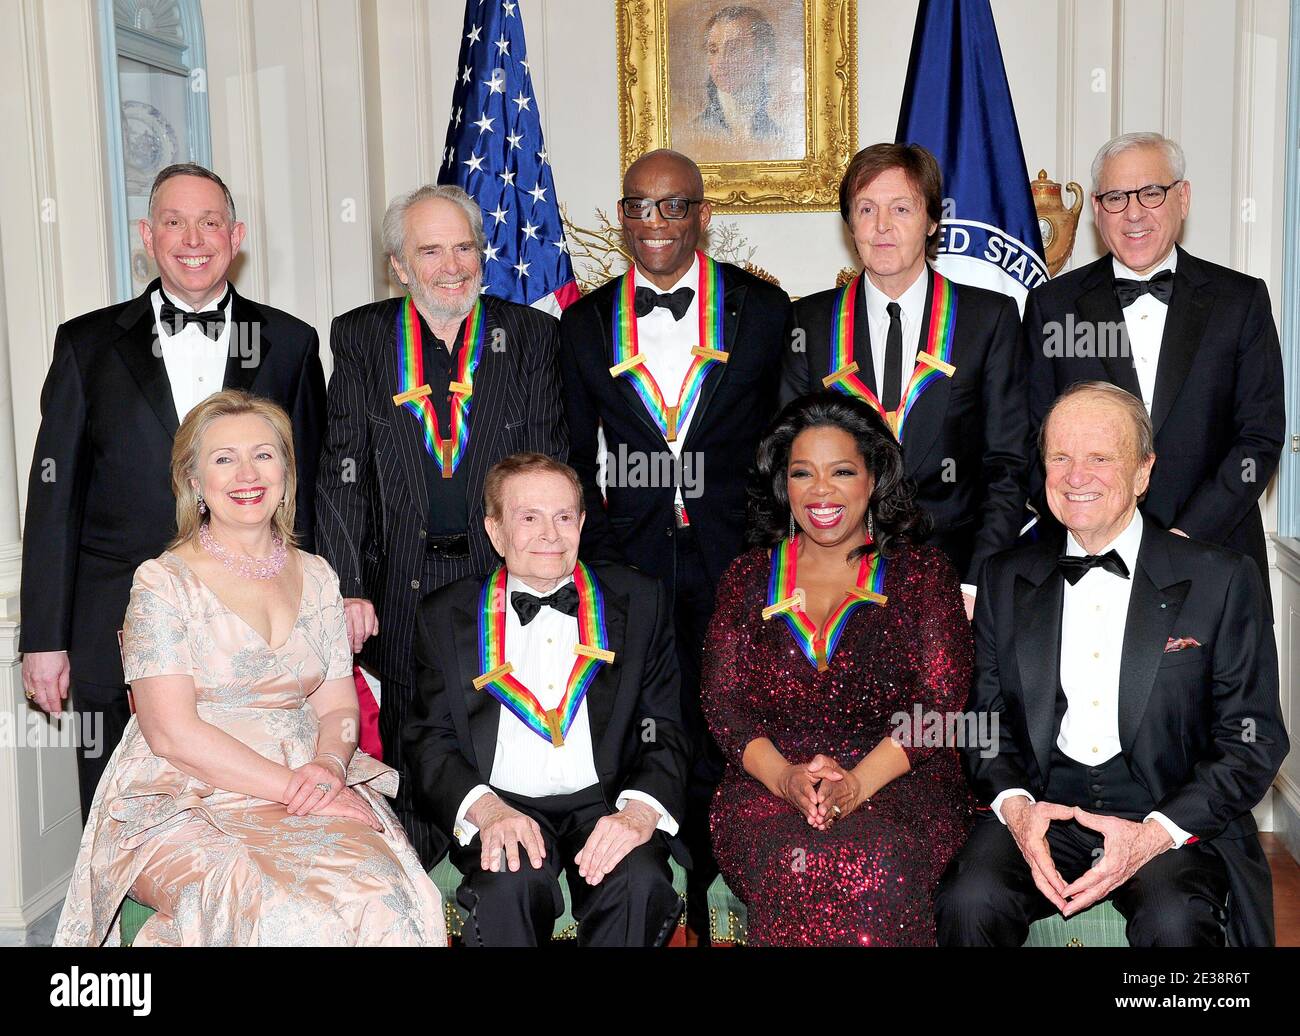 The 2010 Kennedy Center honorees (Top row, L-R) Michael M. Kaiser, President, John F. Kennedy Center for the Performing Arts; Merle Haggard; Bill T. Jones; Sir Paul McCartney; and David M. Rubenstein, Chairman, John F. Kennedy Center for the Performing Arts, (Bottom, L-R) United States Secretary of State Hillary Rodham Clinton; Jerry Herman; Oprah Winfrey; and George Stevens, Jr.pose for their formal class photo following the formal Artist's Dinner at the United States Department of State in Washington, D.C., USA on Saturday, December 4, 2010. Photo By Ron Sachs/ABACAPRESS.COM Stock Photo